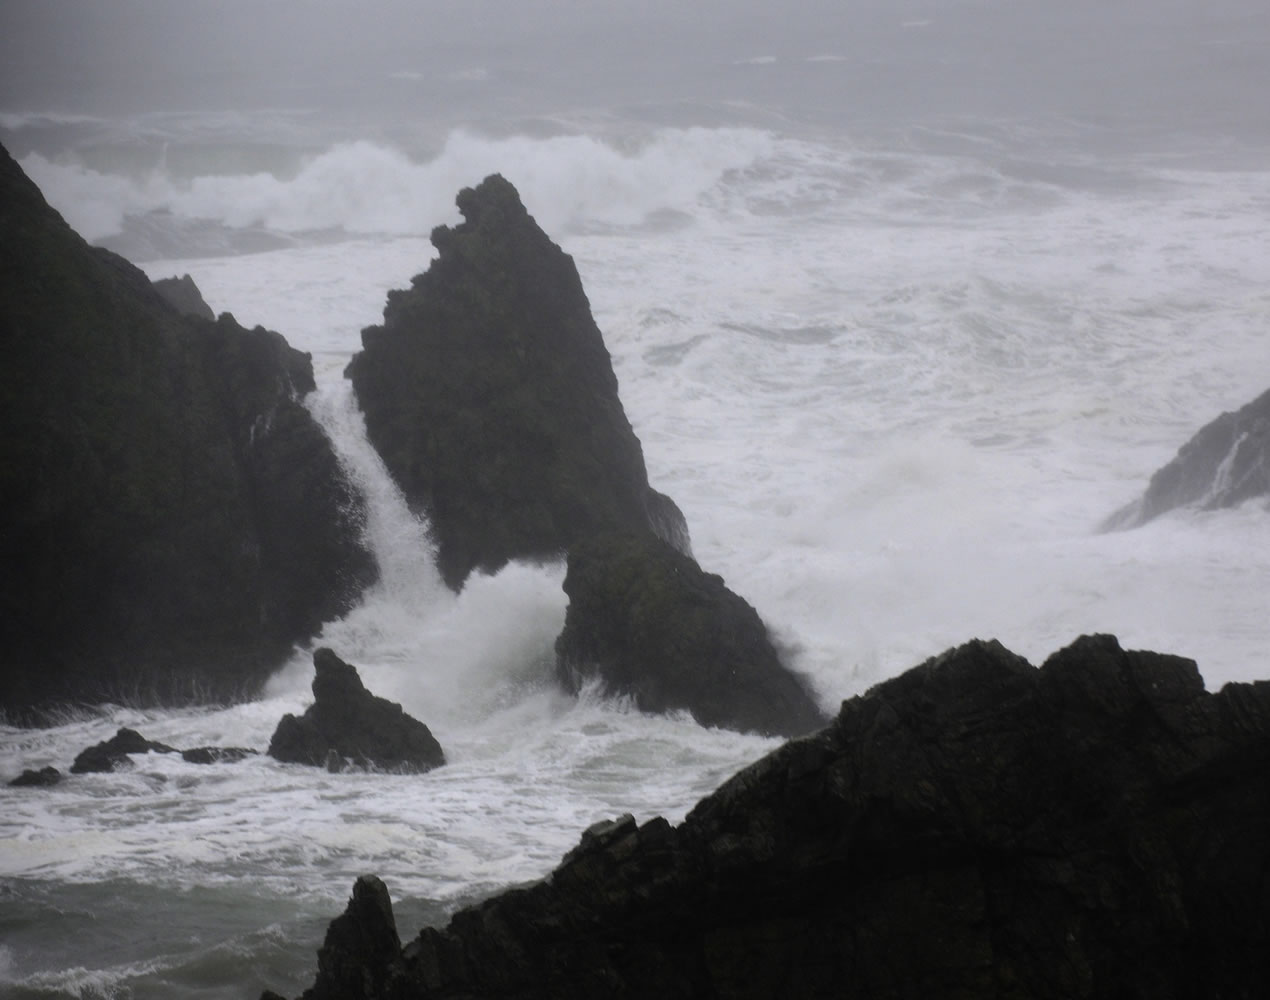 Stormy seas surge over rocks along the coast near Bandon, Ore., earlier this month.